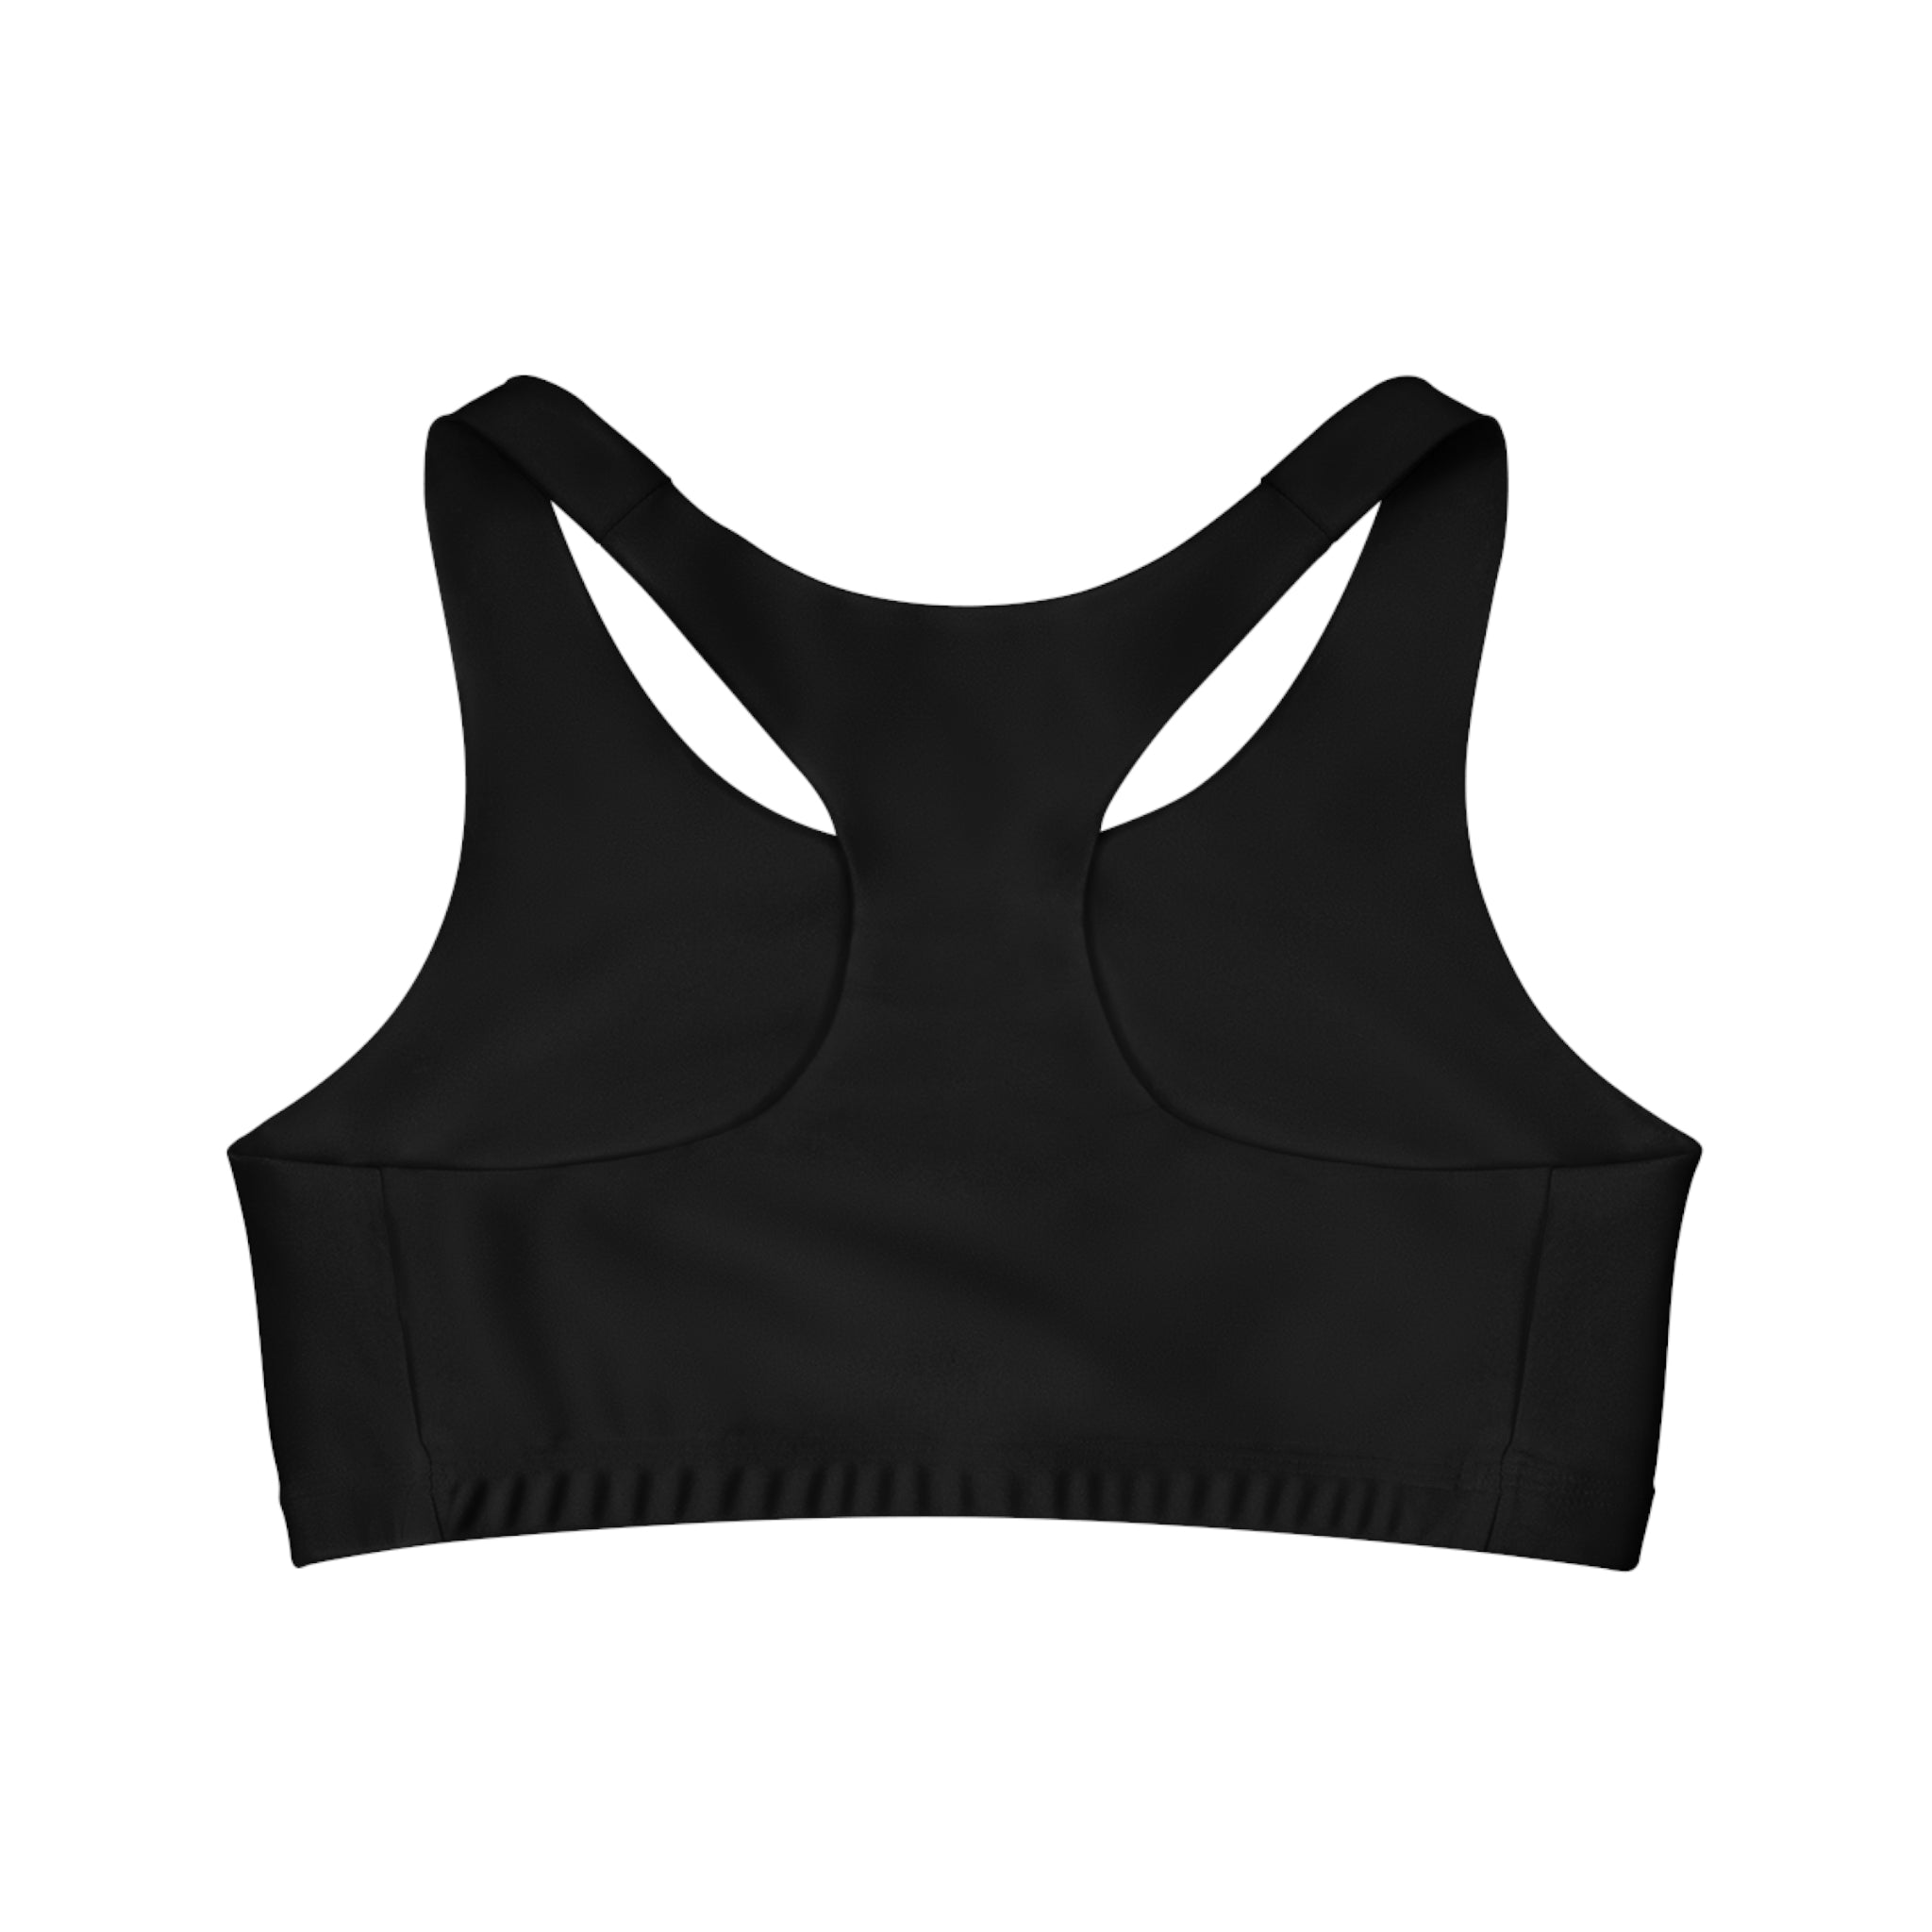 Affordable sports bra's – The Whealthy Brand & Co.